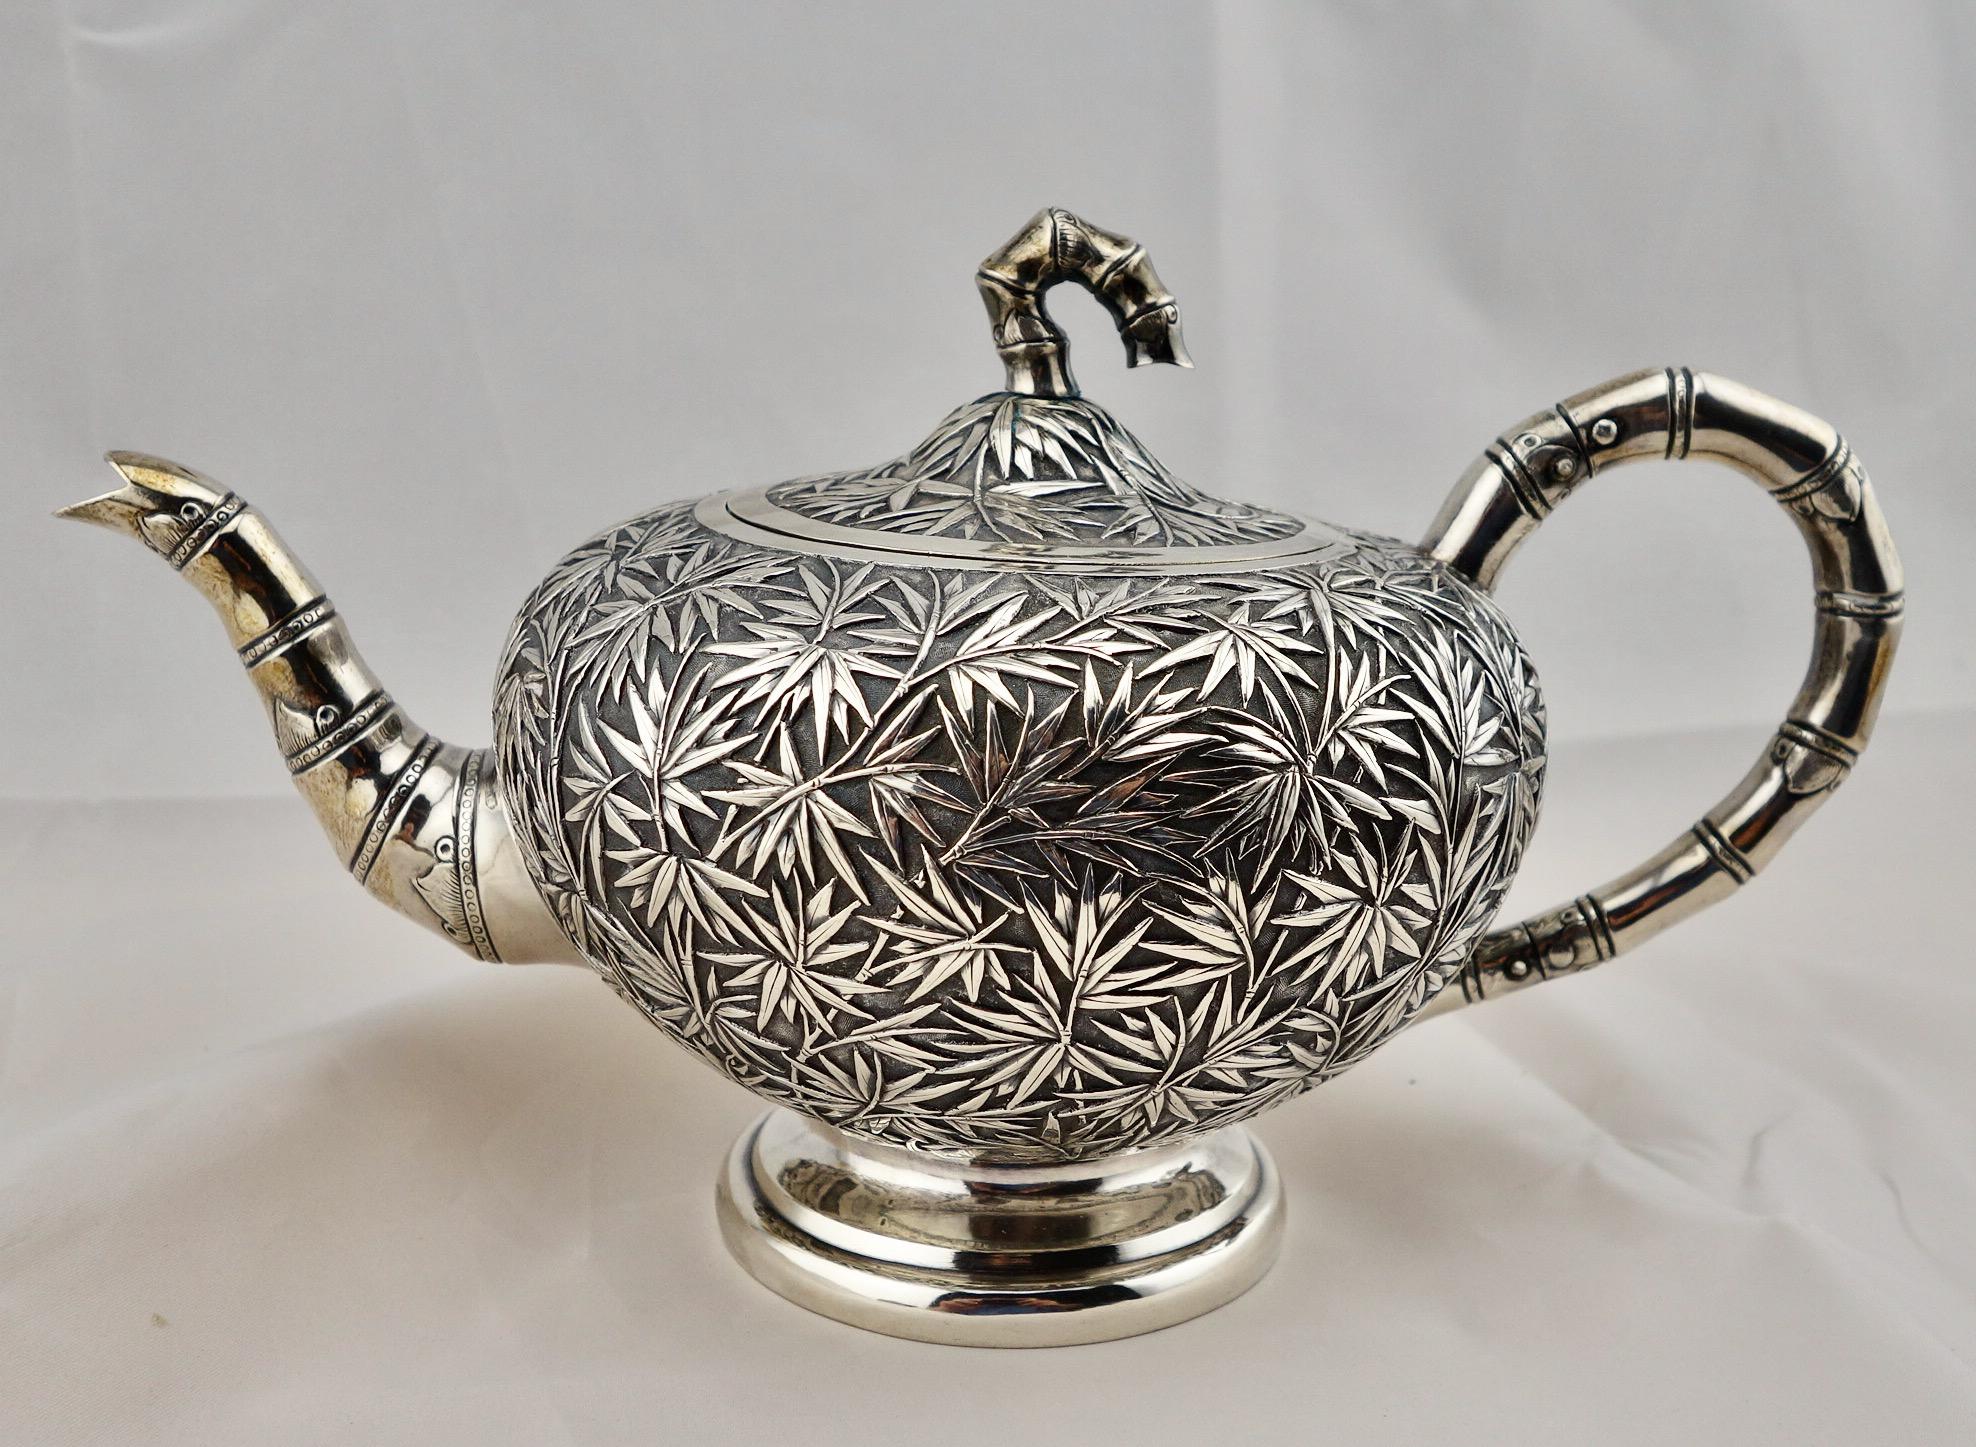 Chinese export bamboo pattern silver 5-piece tea service, circa 1860-1880. The teapot, covered sugar, creamer and waste bowl marked 